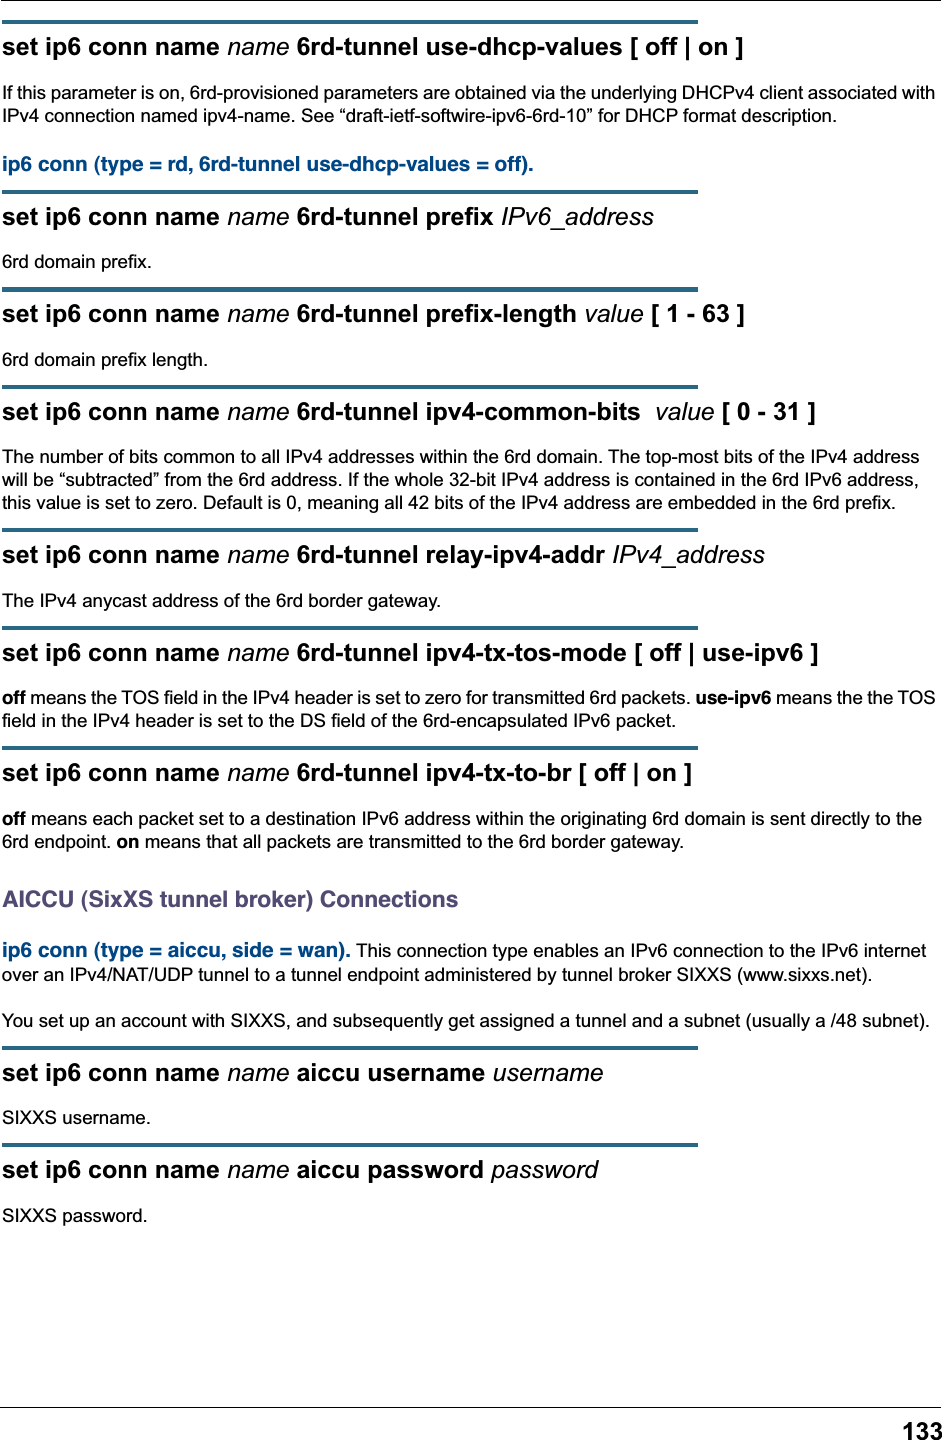 133set ip6 conn name name 6rd-tunnel use-dhcp-values [ off | on ]If this parameter is on, 6rd-provisioned parameters are obtained via the underlying DHCPv4 client associated with IPv4 connection named ipv4-name. See “draft-ietf-softwire-ipv6-6rd-10” for DHCP format description.ip6 conn (type = rd, 6rd-tunnel use-dhcp-values = off). set ip6 conn name name 6rd-tunnel prefix IPv6_address6rd domain prefix.set ip6 conn name name 6rd-tunnel prefix-length value [ 1 - 63 ]6rd domain prefix length.set ip6 conn name name 6rd-tunnel ipv4-common-bits  value [ 0 - 31 ]The number of bits common to all IPv4 addresses within the 6rd domain. The top-most bits of the IPv4 address will be “subtracted” from the 6rd address. If the whole 32-bit IPv4 address is contained in the 6rd IPv6 address, this value is set to zero. Default is 0, meaning all 42 bits of the IPv4 address are embedded in the 6rd prefix.set ip6 conn name name 6rd-tunnel relay-ipv4-addr IPv4_addressThe IPv4 anycast address of the 6rd border gateway.set ip6 conn name name 6rd-tunnel ipv4-tx-tos-mode [ off | use-ipv6 ]off means the TOS field in the IPv4 header is set to zero for transmitted 6rd packets. use-ipv6 means the the TOS field in the IPv4 header is set to the DS field of the 6rd-encapsulated IPv6 packet.set ip6 conn name name 6rd-tunnel ipv4-tx-to-br [ off | on ]off means each packet set to a destination IPv6 address within the originating 6rd domain is sent directly to the 6rd endpoint. on means that all packets are transmitted to the 6rd border gateway.AICCU (SixXS tunnel broker) Connectionsip6 conn (type = aiccu, side = wan). This connection type enables an IPv6 connection to the IPv6 internet over an IPv4/NAT/UDP tunnel to a tunnel endpoint administered by tunnel broker SIXXS (www.sixxs.net).You set up an account with SIXXS, and subsequently get assigned a tunnel and a subnet (usually a /48 subnet).set ip6 conn name name aiccu username usernameSIXXS username.set ip6 conn name name aiccu password passwordSIXXS password.